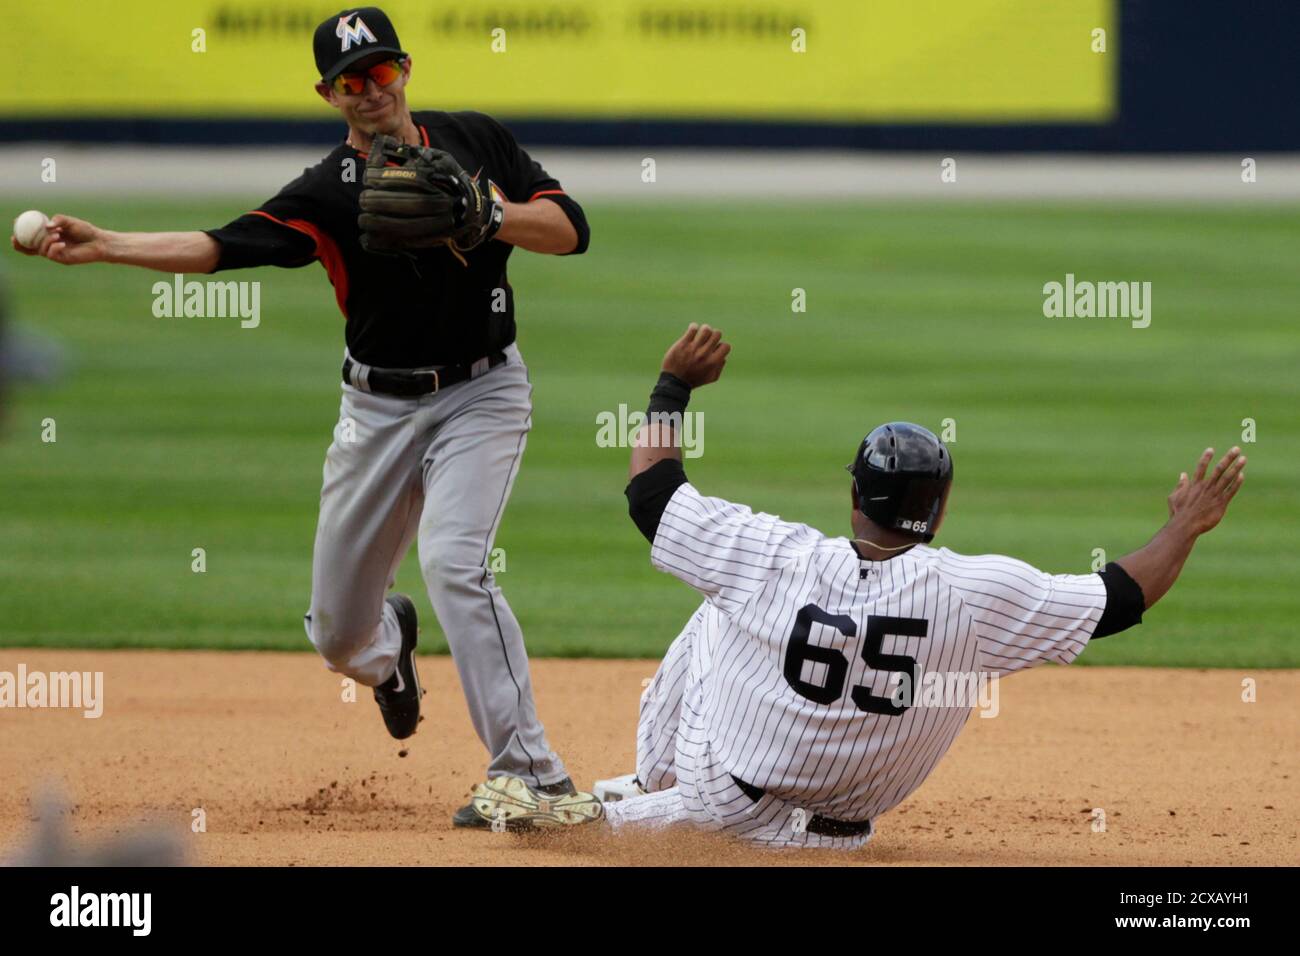 New York Yankees' Zoilo Almonte (R) is out at second base as Miami Marlins' Austin Nola tags on time during the seventh inning of the exhibition game 'Legend Series' honoring former Miami Marlins player Mariano Rivera, at the Rod Carew Stadium in Panama City March 16, 2014. Major League Baseball and the New York Yankees returned to Panama for the first time in 67 years on Saturday, offering one final goodbye to Mariano Rivera and bringing the career of the game's greatest closer full circle. REUTERS/ Carlos Jasso(PANAMA - Tags: SPORT BASEBALL) Stock Photo